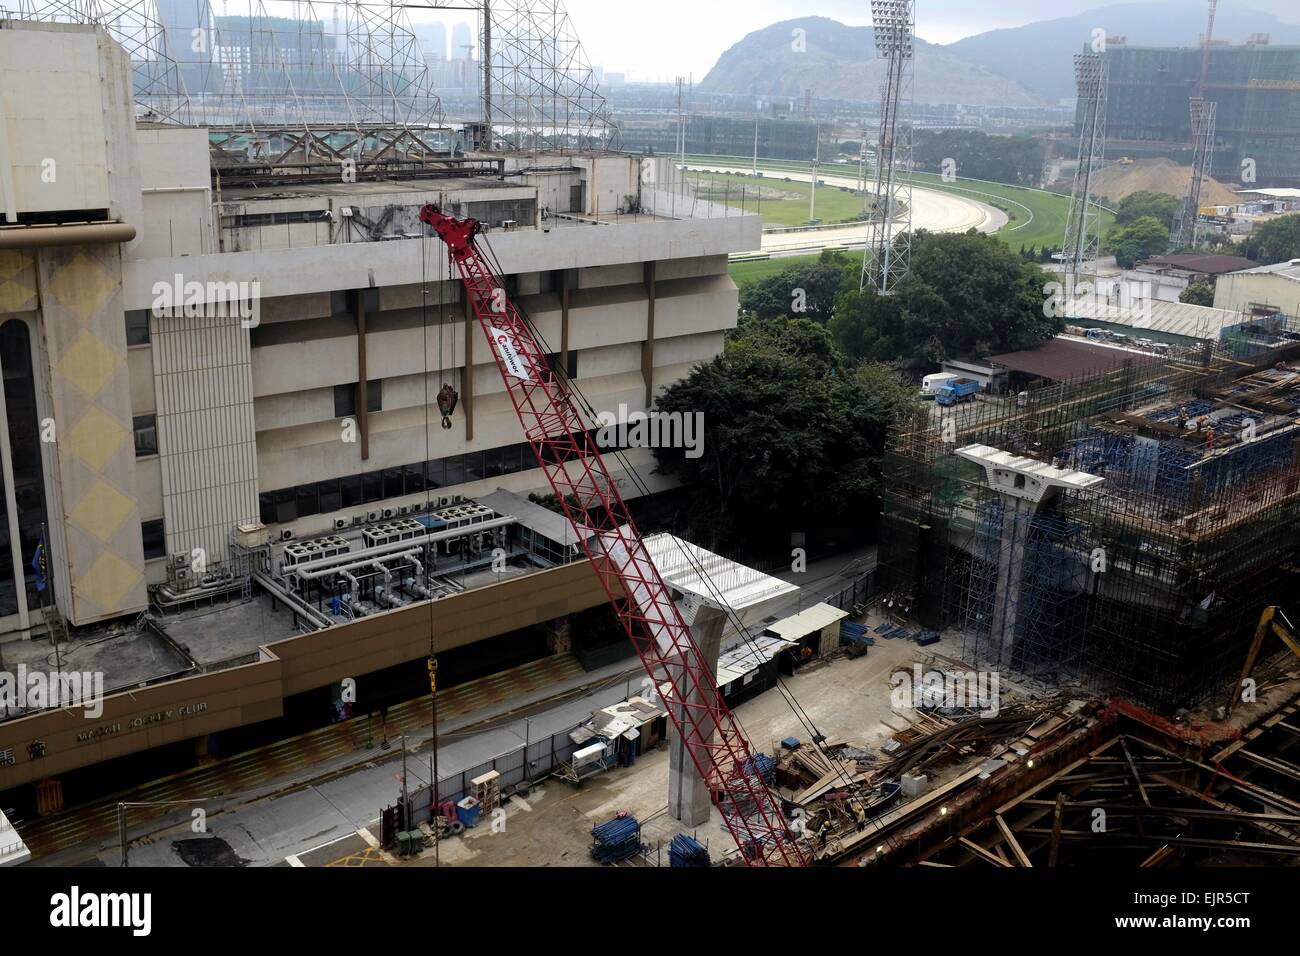 Construction work continues on Macau's Light Rail system at the planned Macau Jockey Club stop.  The Light Rail project has been plagued by cost overruns and delays Stock Photo